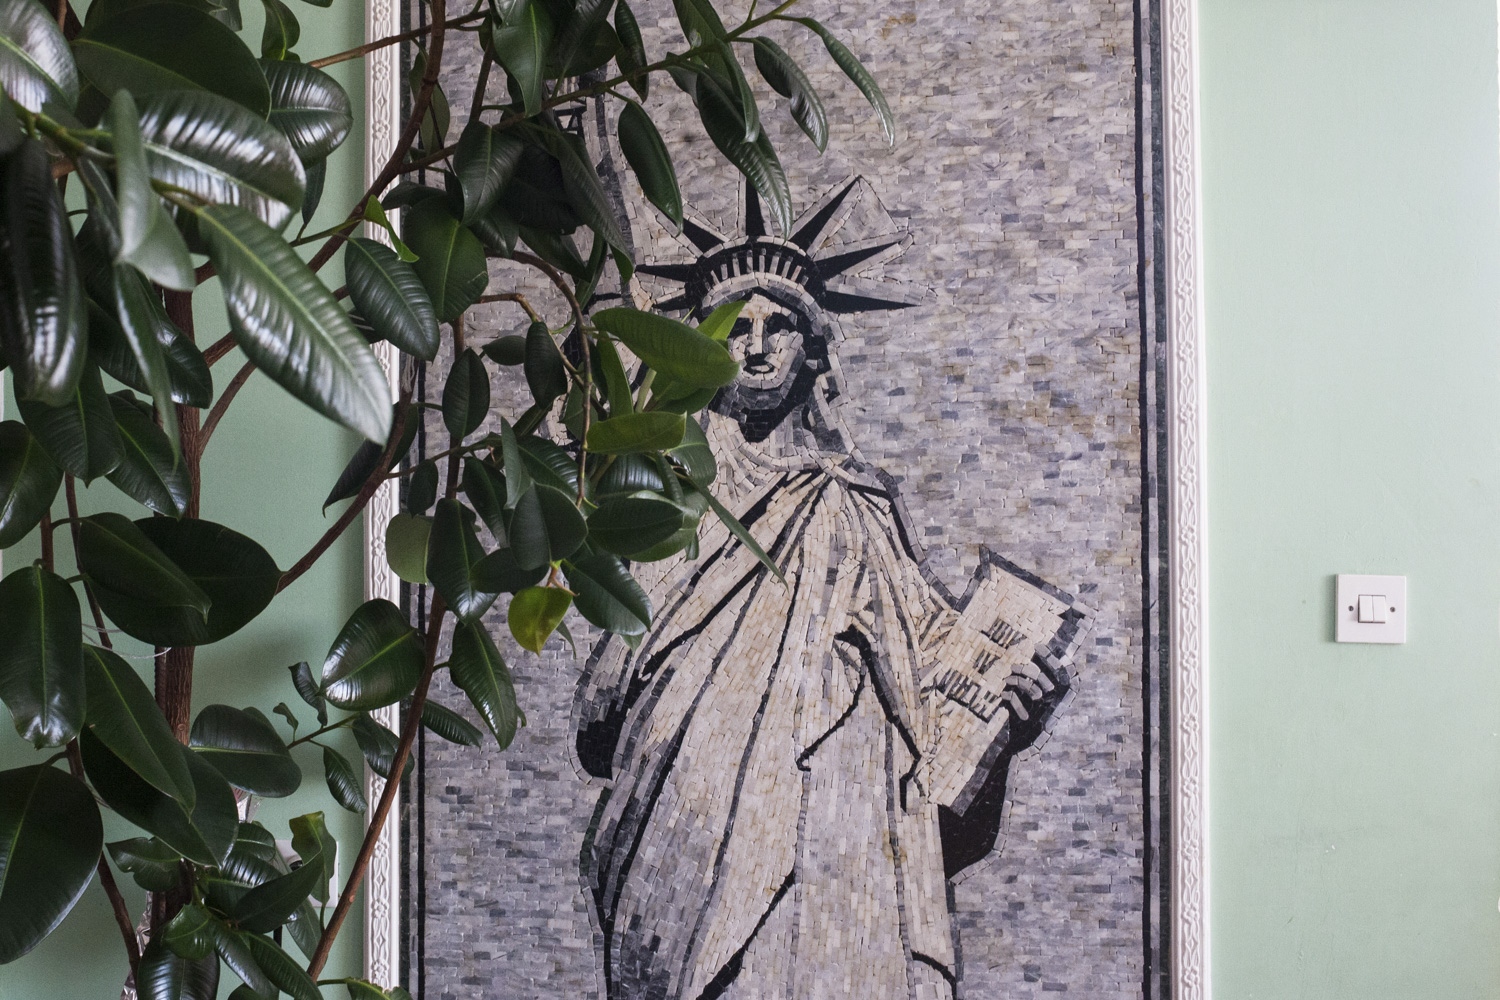 Mosaic of the Statue of Liberty in the living room of Ruzhdi KuÃ§i, known as â€œAmerikaniâ€,...